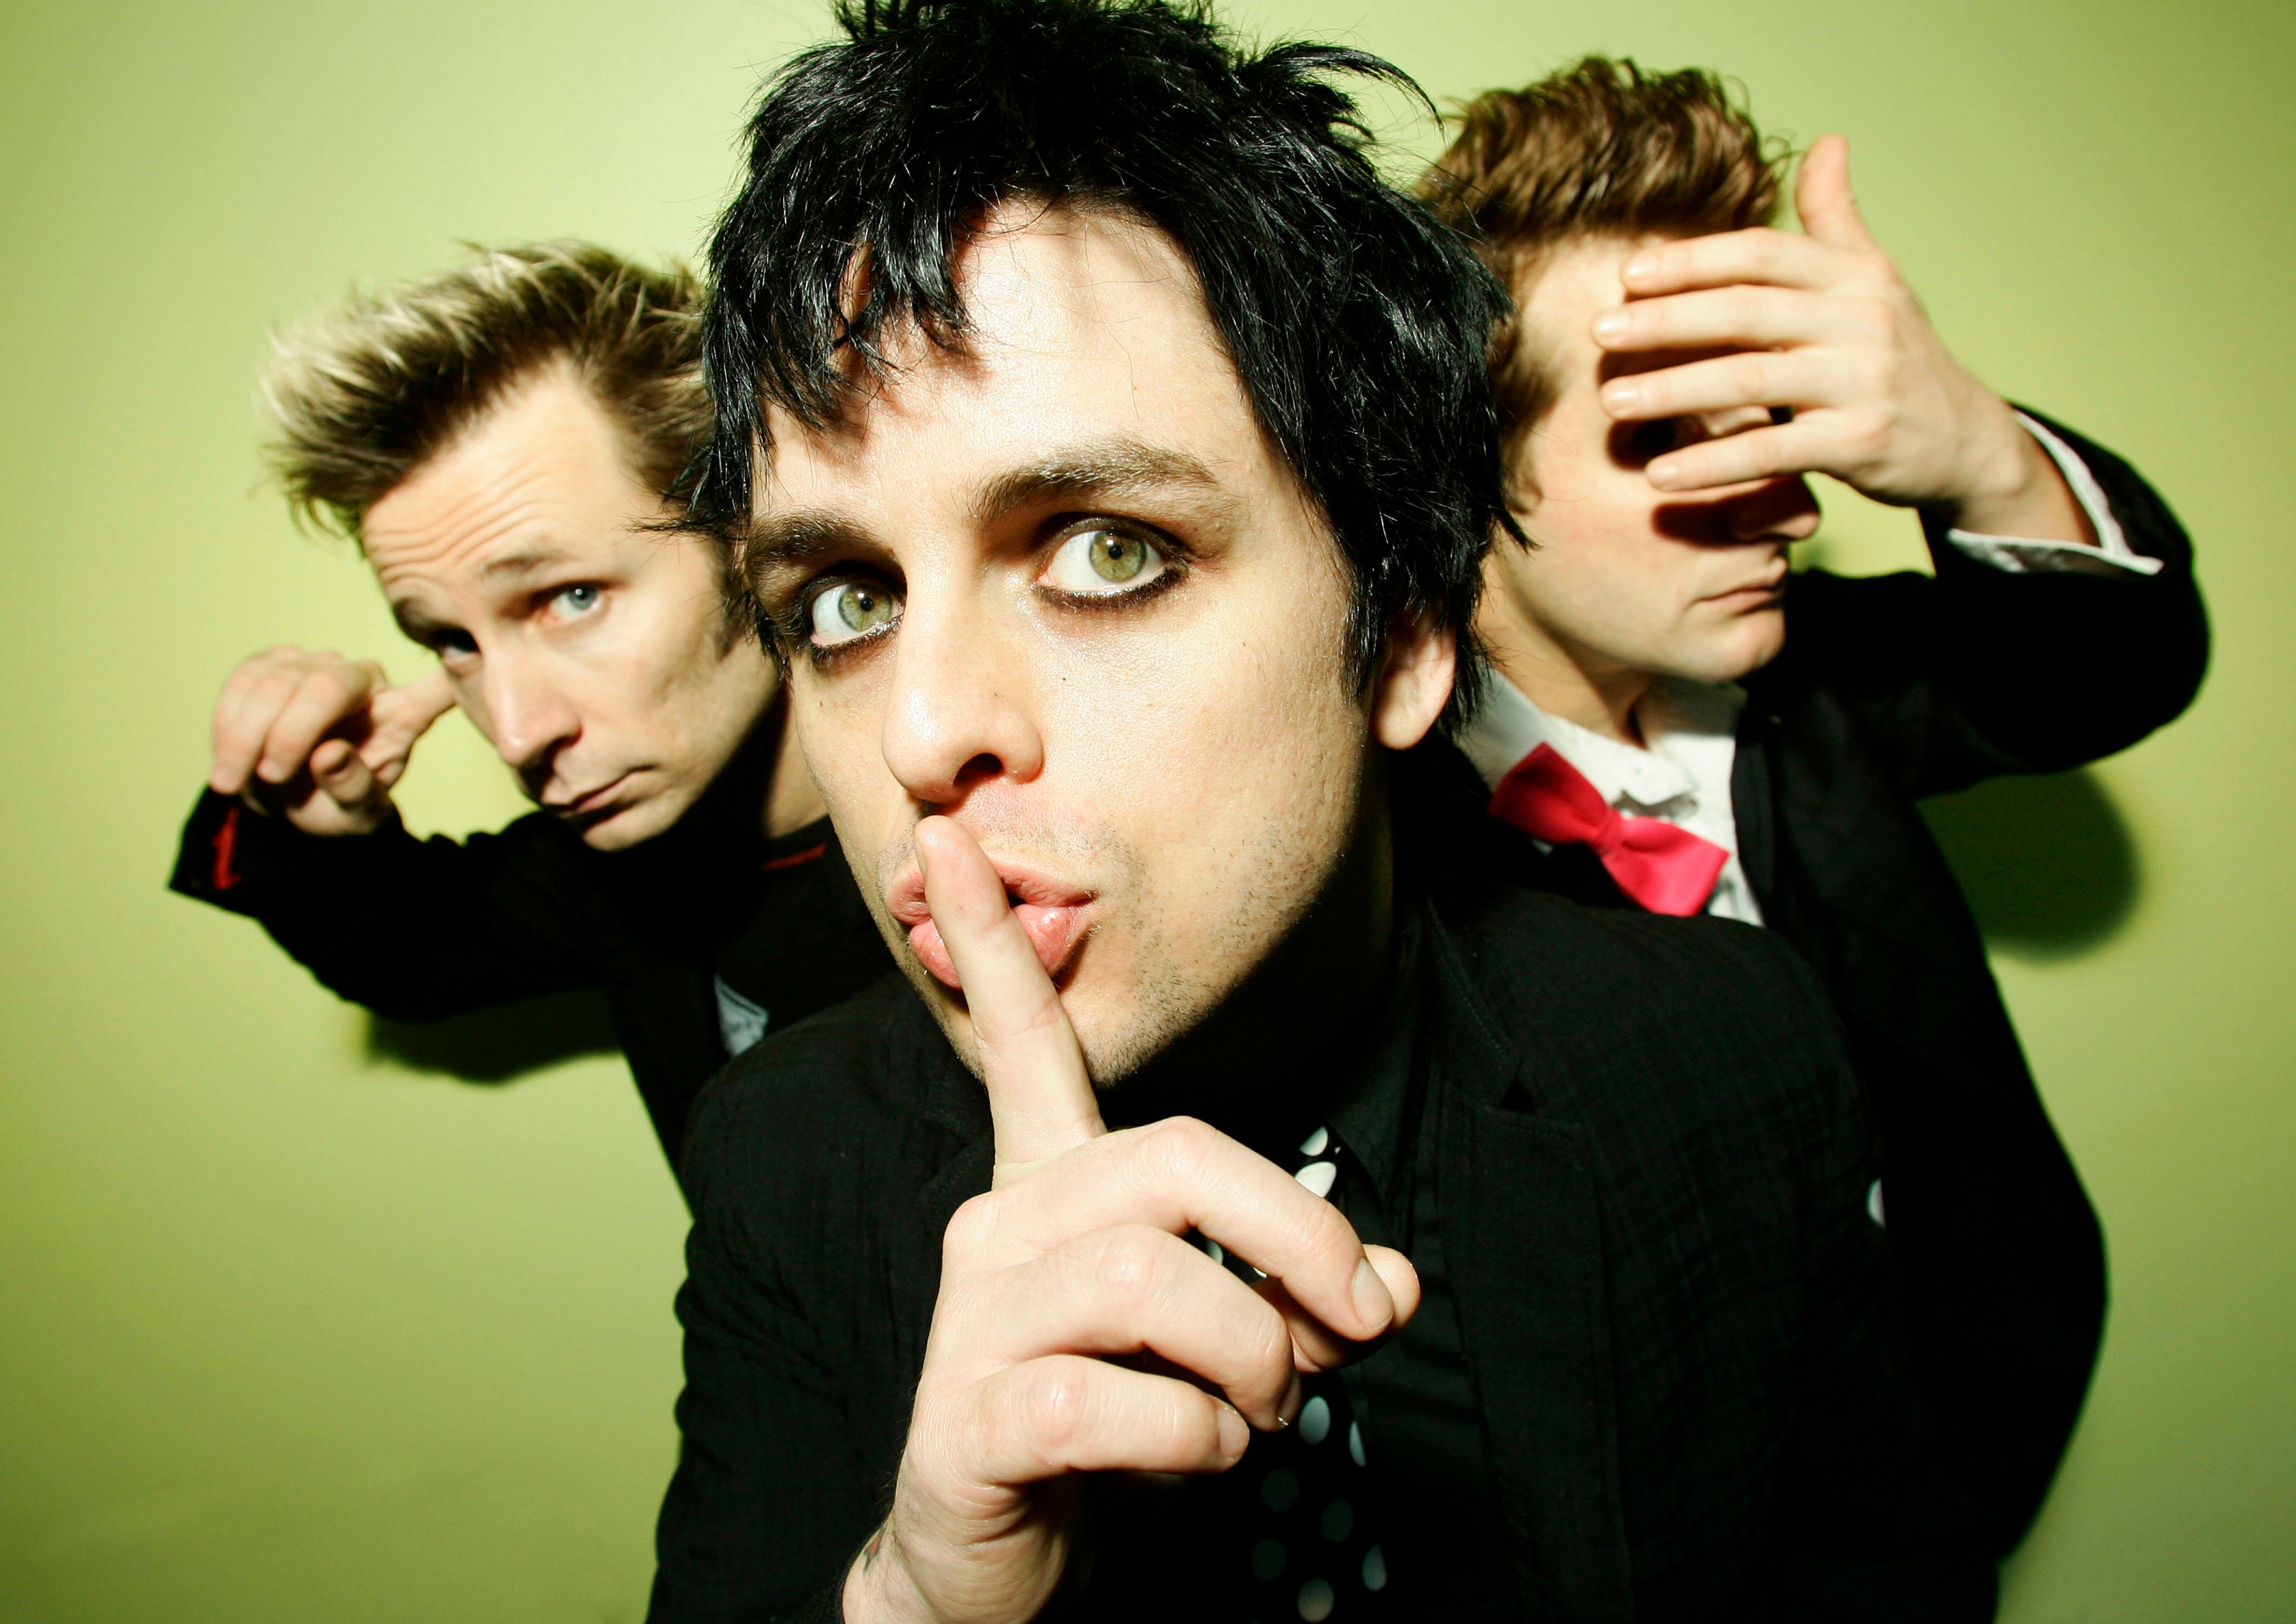 Green Day's Mike Dirnt, Billie Joe Armstrong, and Tré Cool with a green background